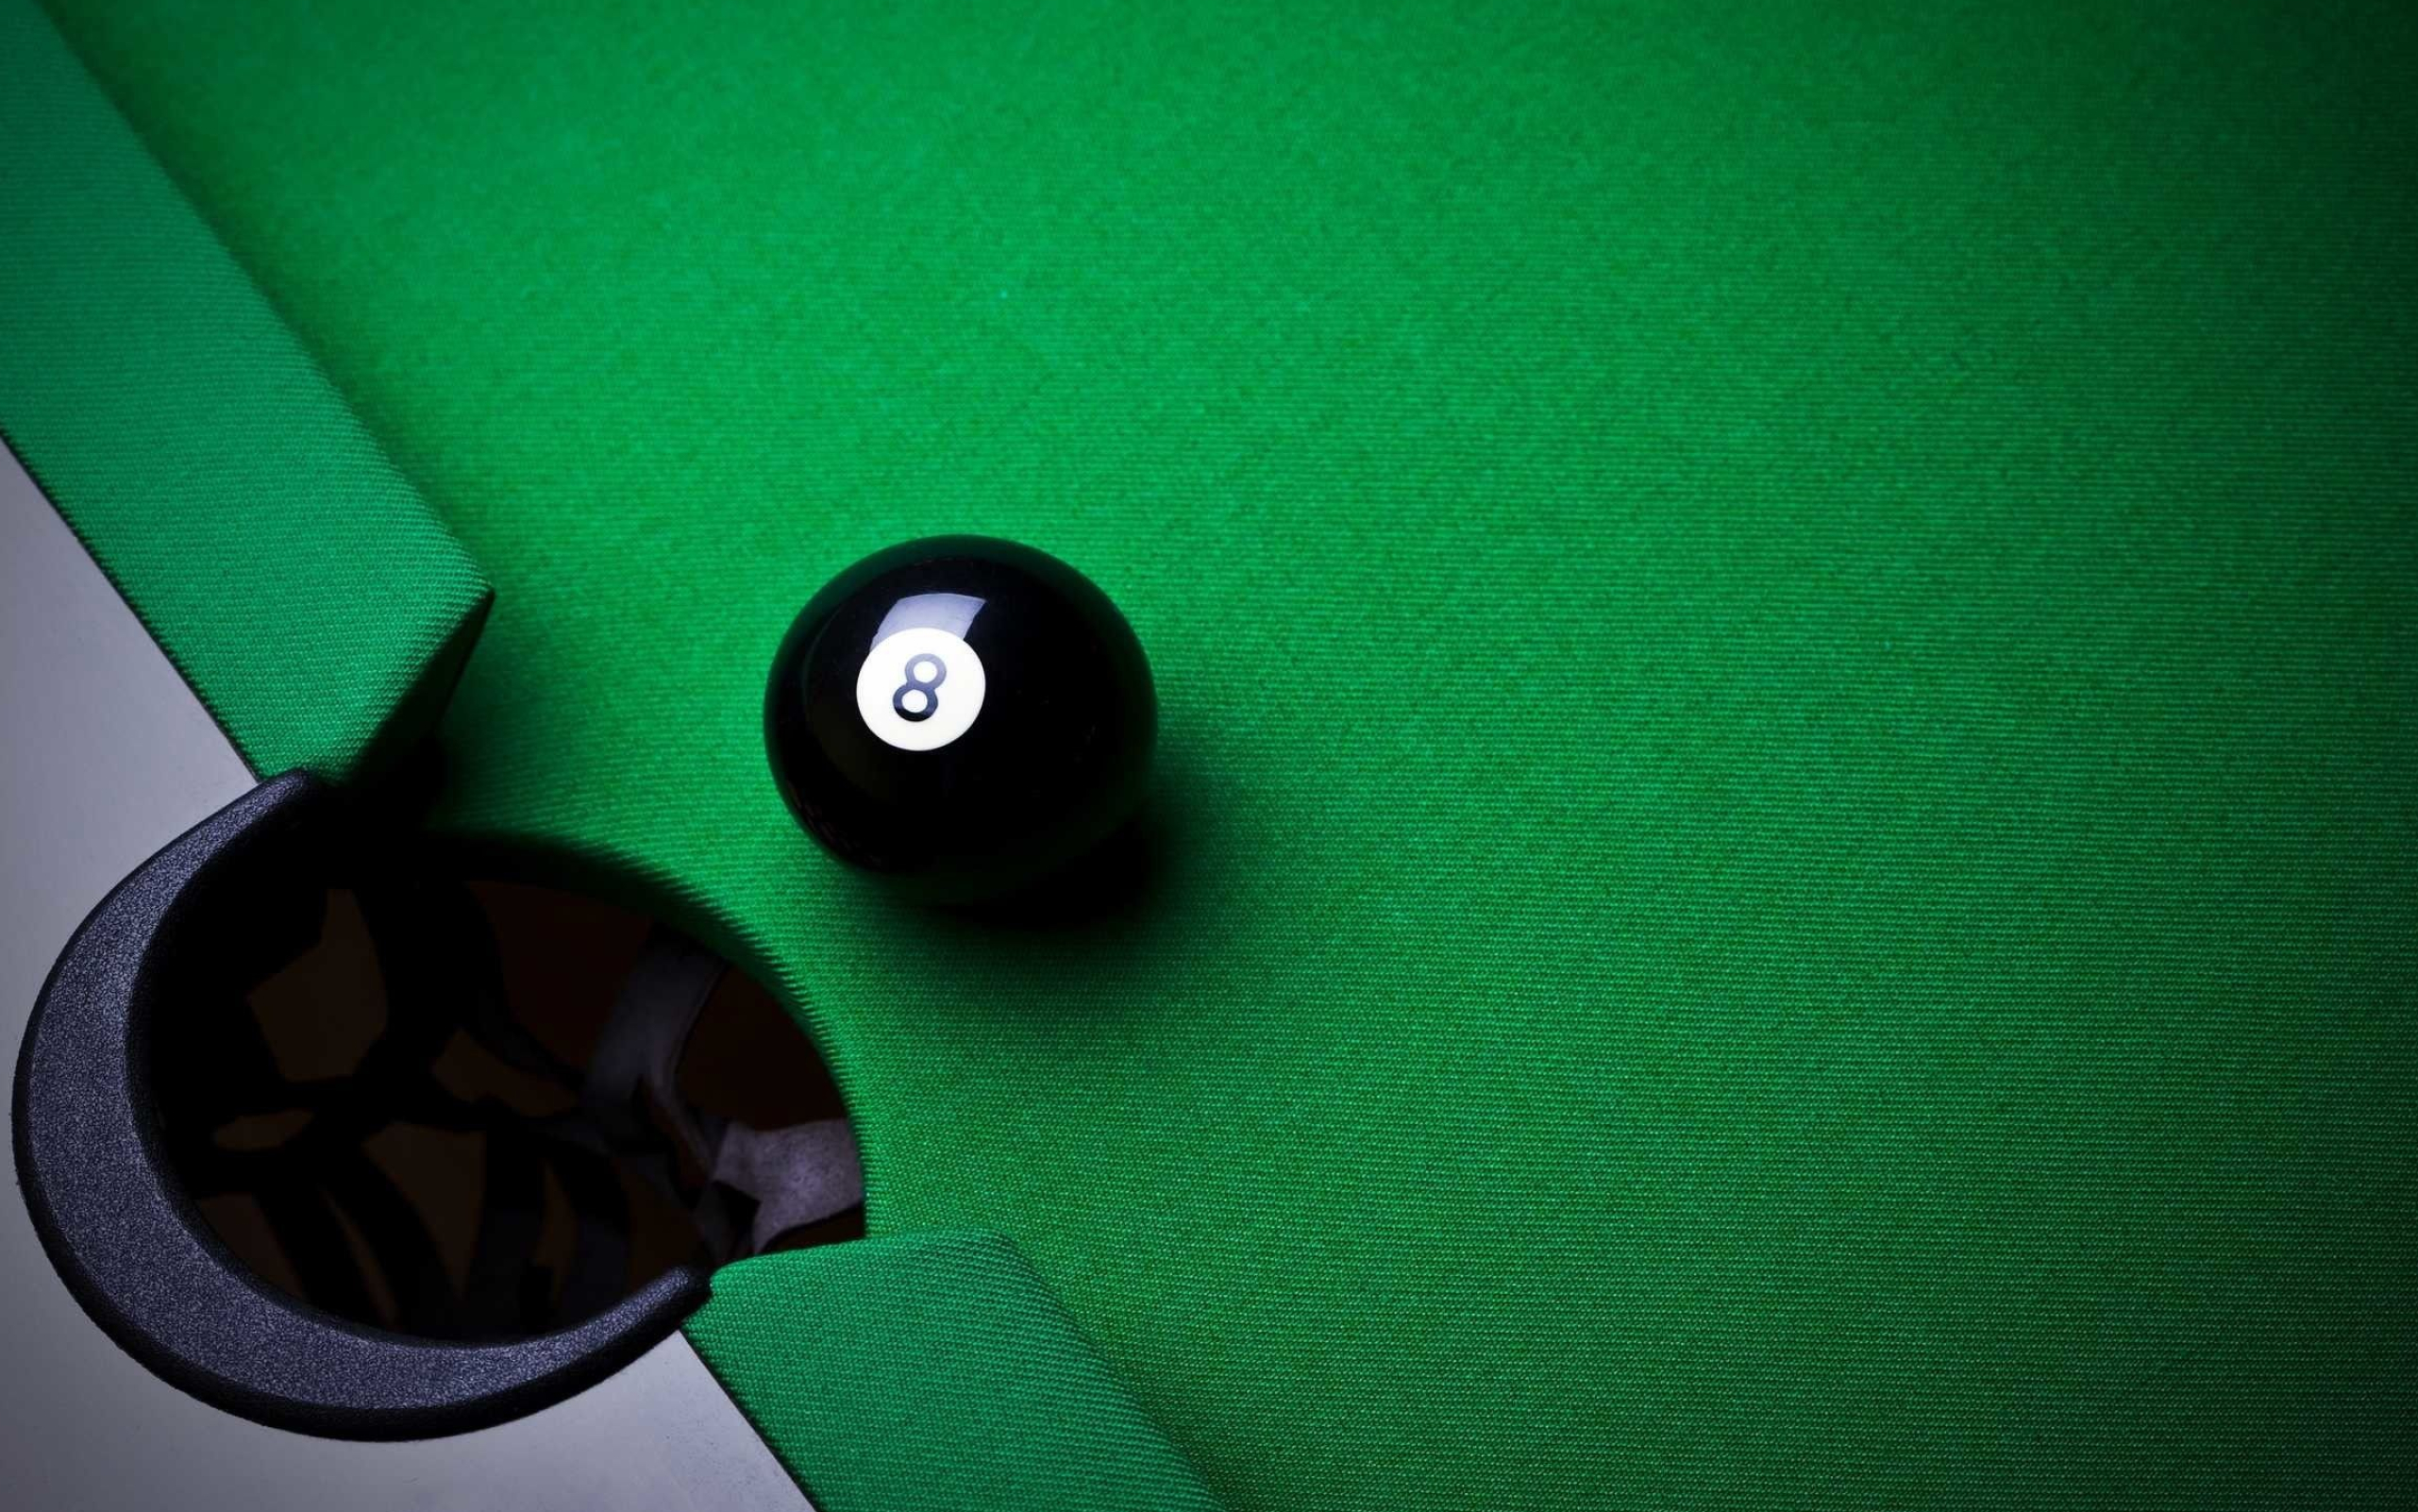 Billiards: The solid black object ball, The symbol of the eight-ball pool game, Cue sports. 2570x1610 HD Background.